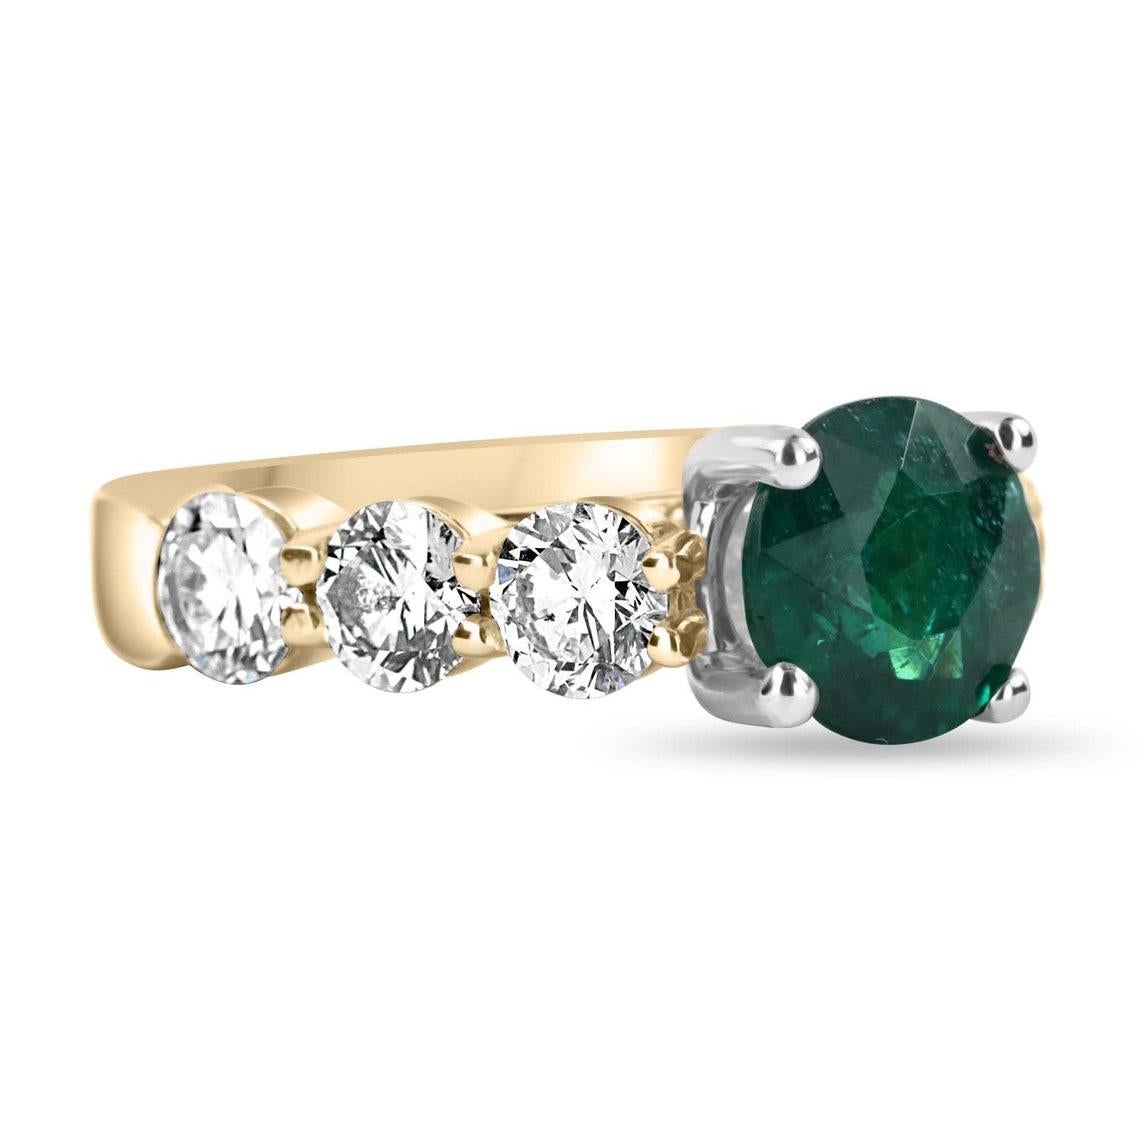 Displayed is an extraordinary 4.55-total carat weight round vivid Dark green emerald & diamond solitaire with accents engagement or statement ring in 18K yellow & white gold. This gorgeous ring carries a full 2.25-carat dark green emerald expertly